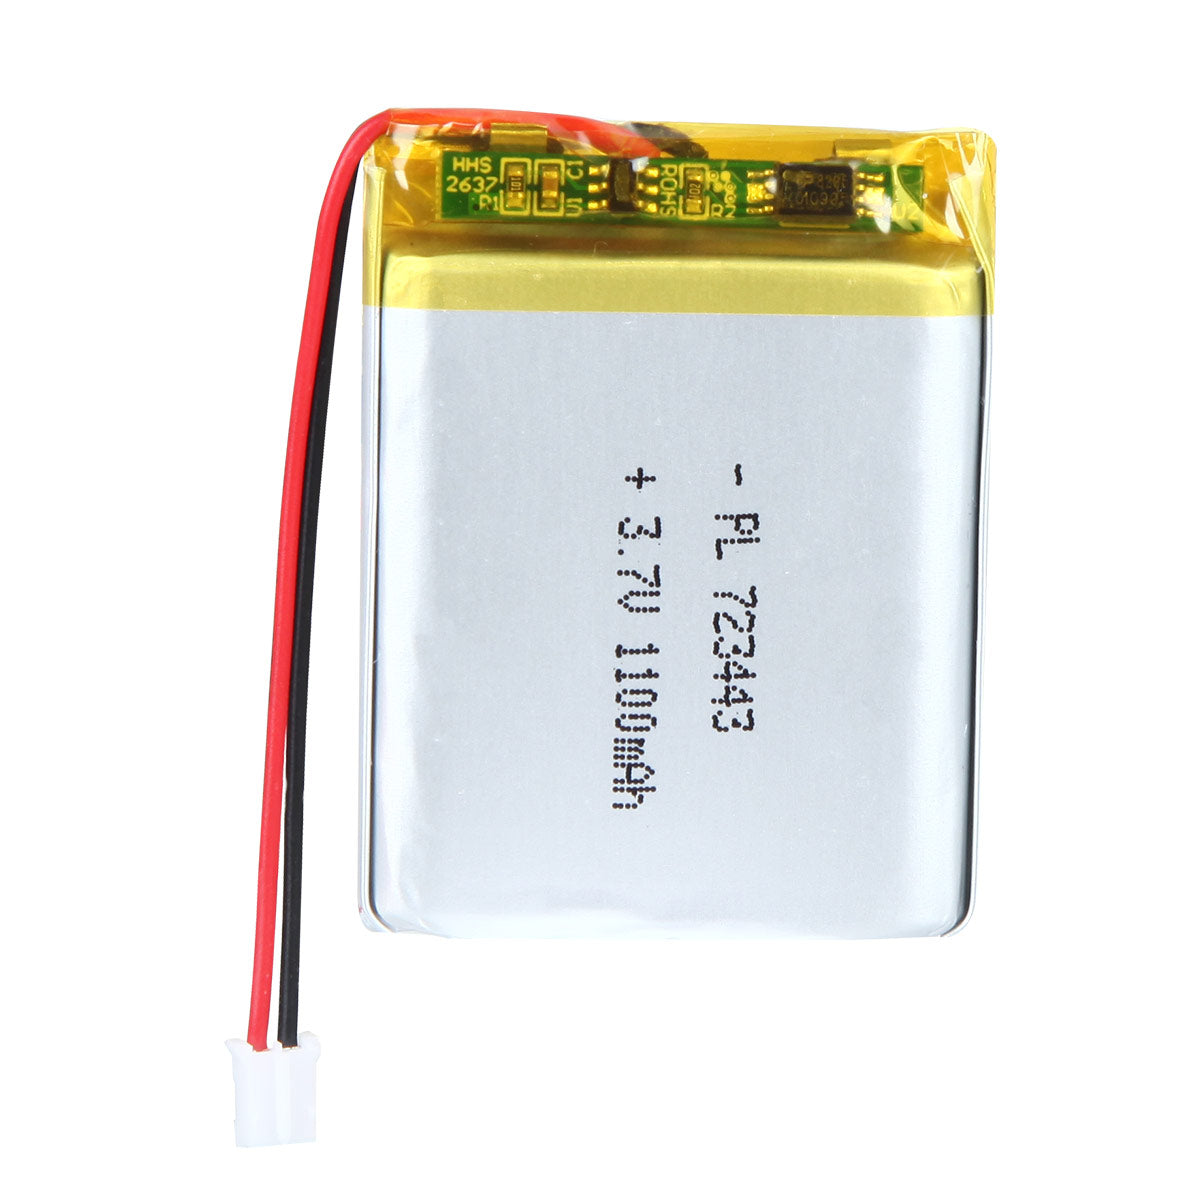 YDL 3.7V 1100mAh 723443 Rechargeable Lithium Polymer Battery Length 45mm